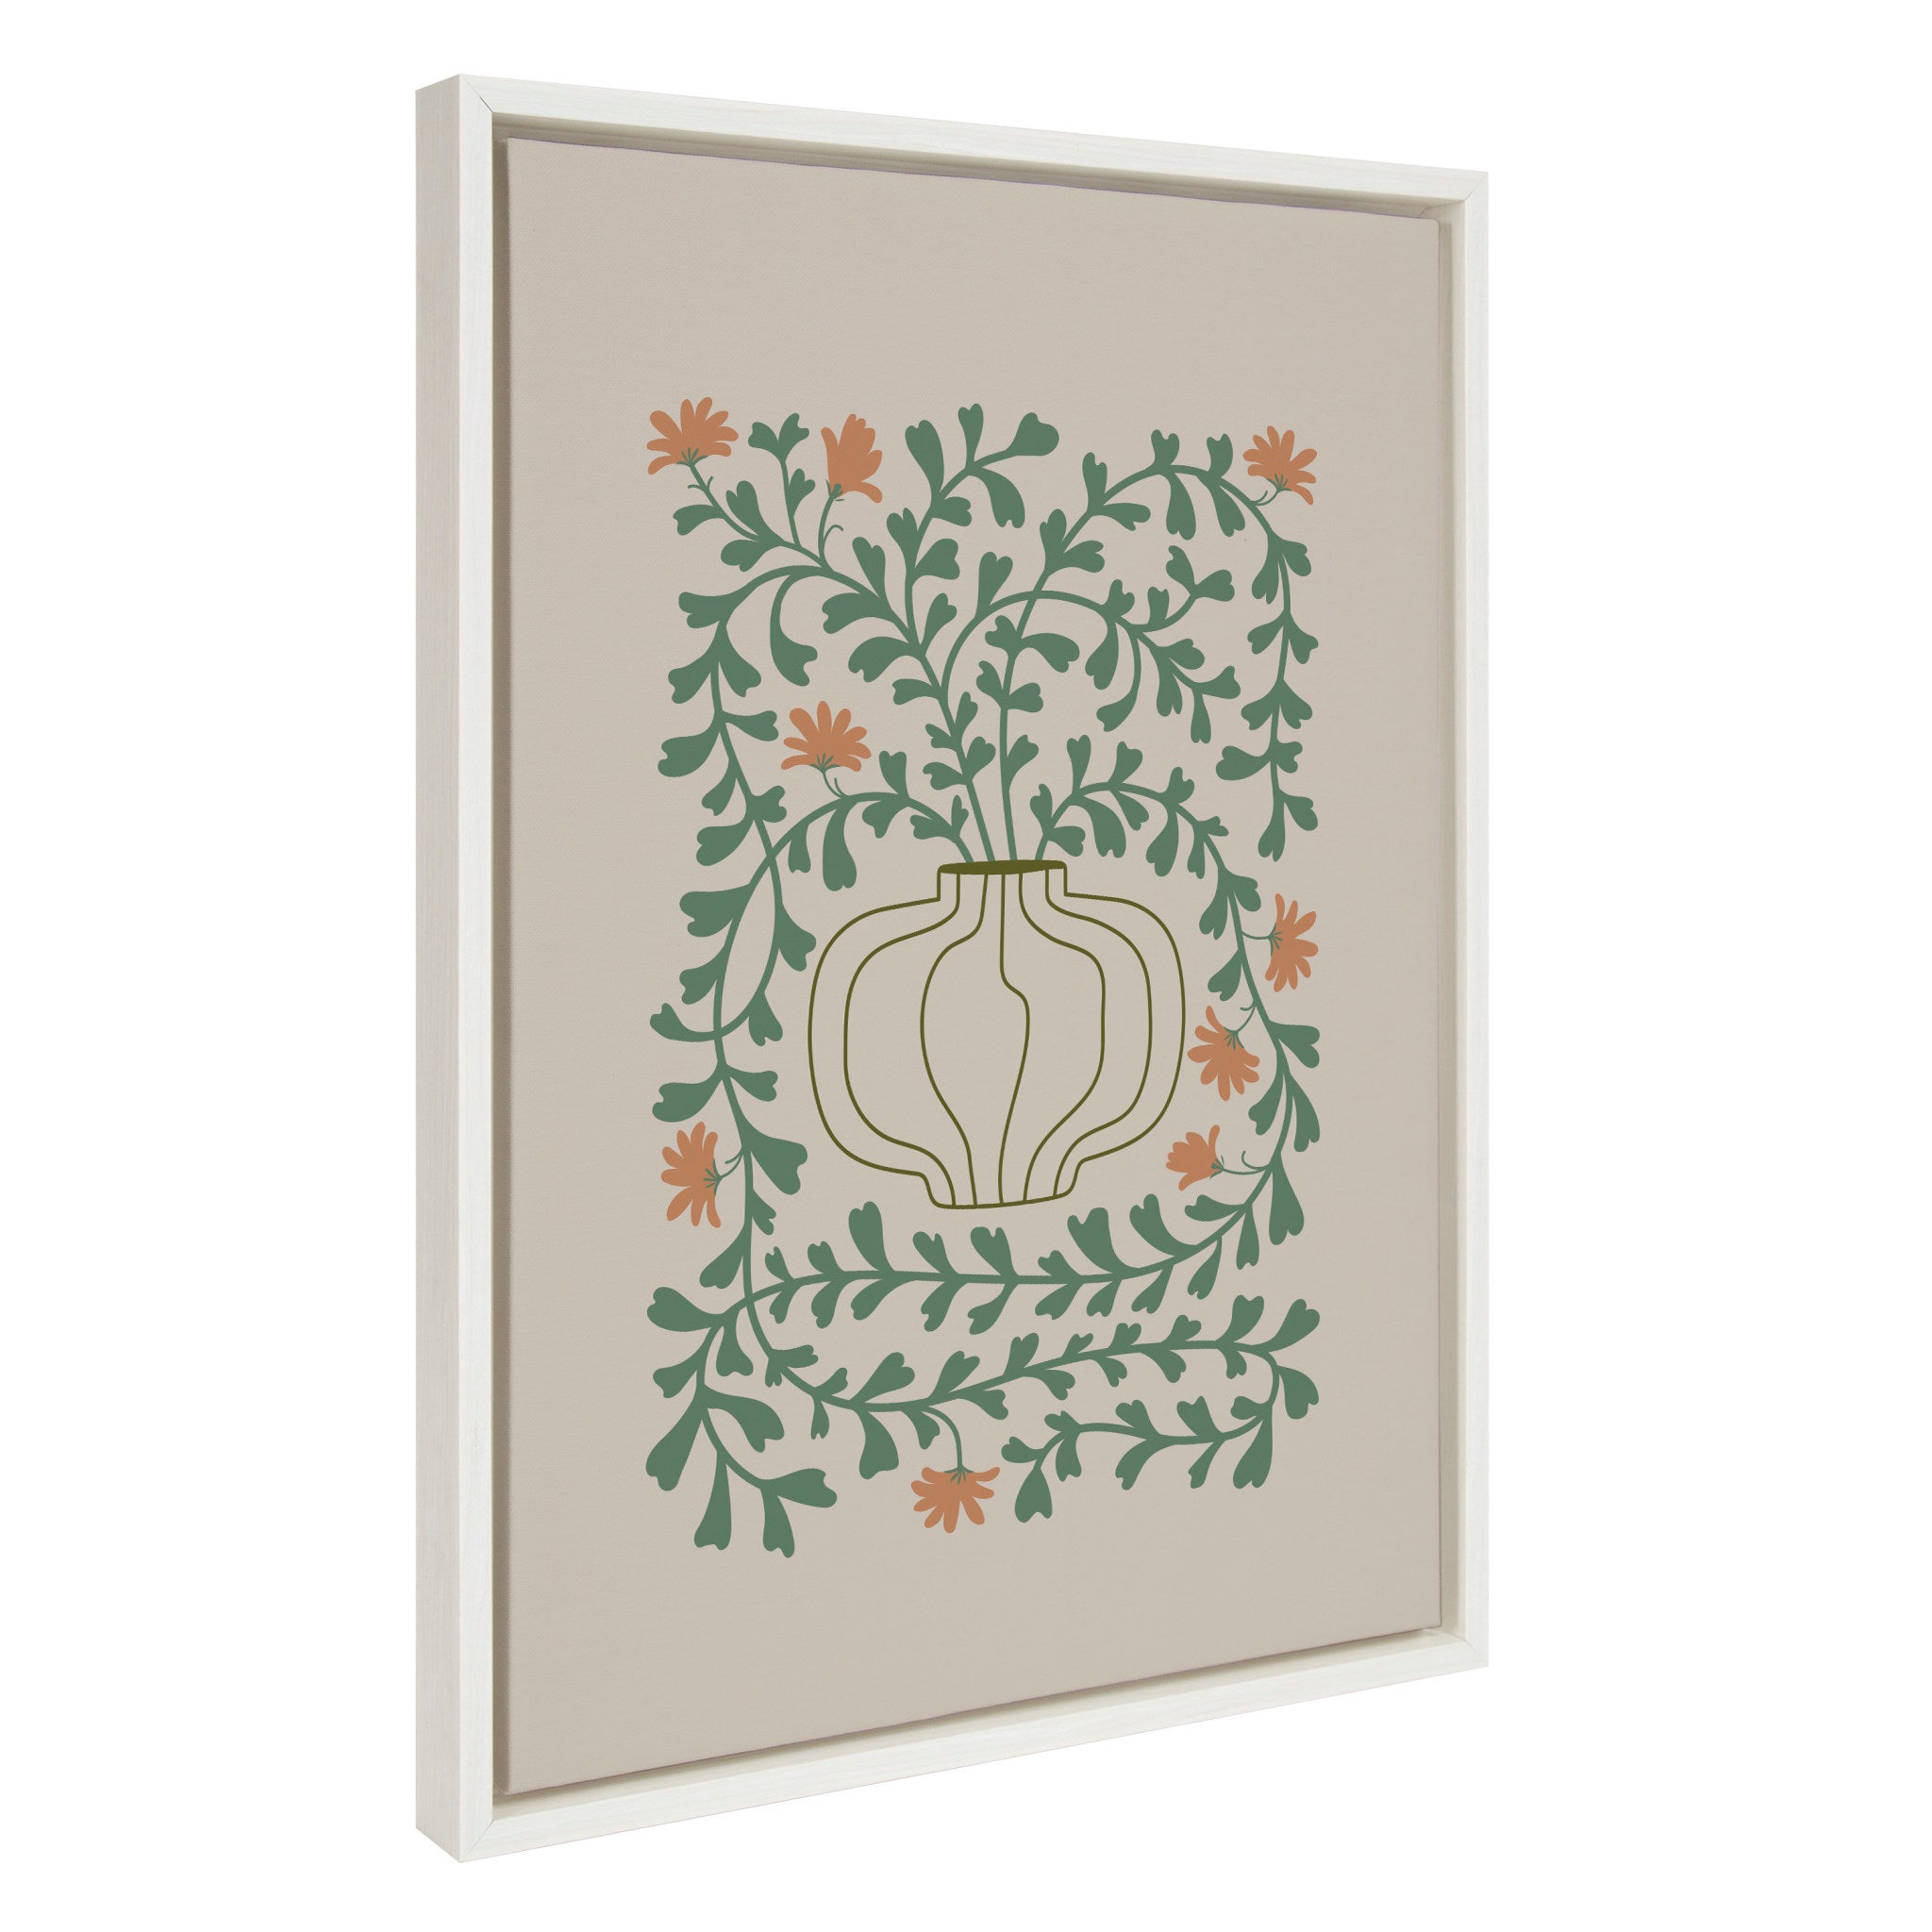 Sylvie Colorful Abstract Retro Floral Green and Orange Framed Canvas by The Creative Bunch Studio